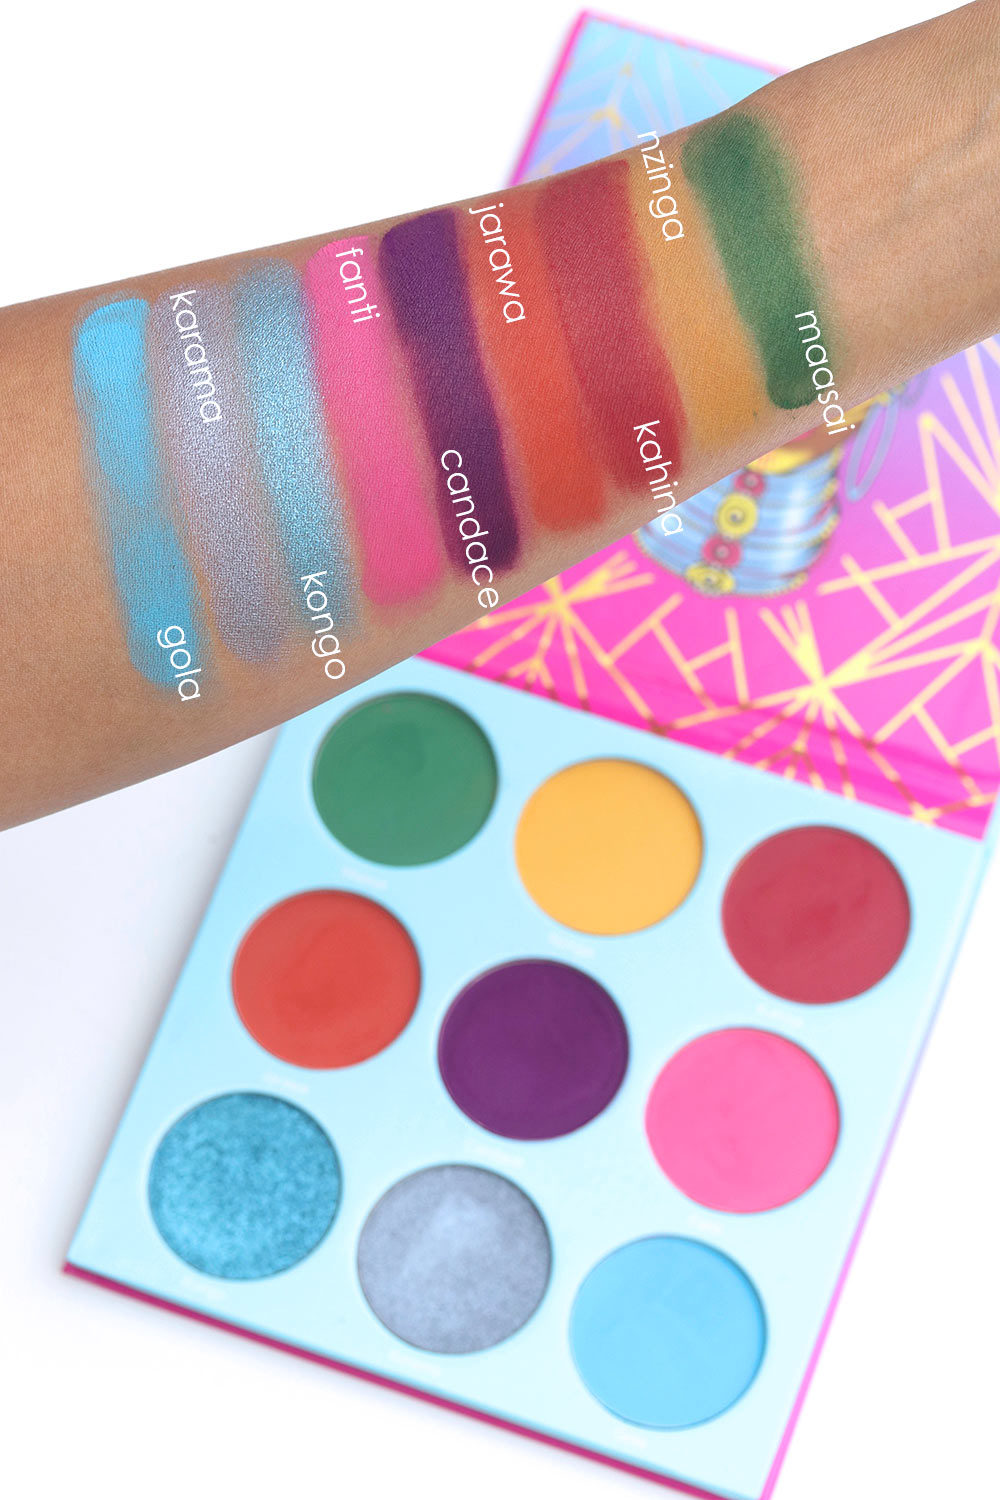 Juvia's place warrior 3 swatches